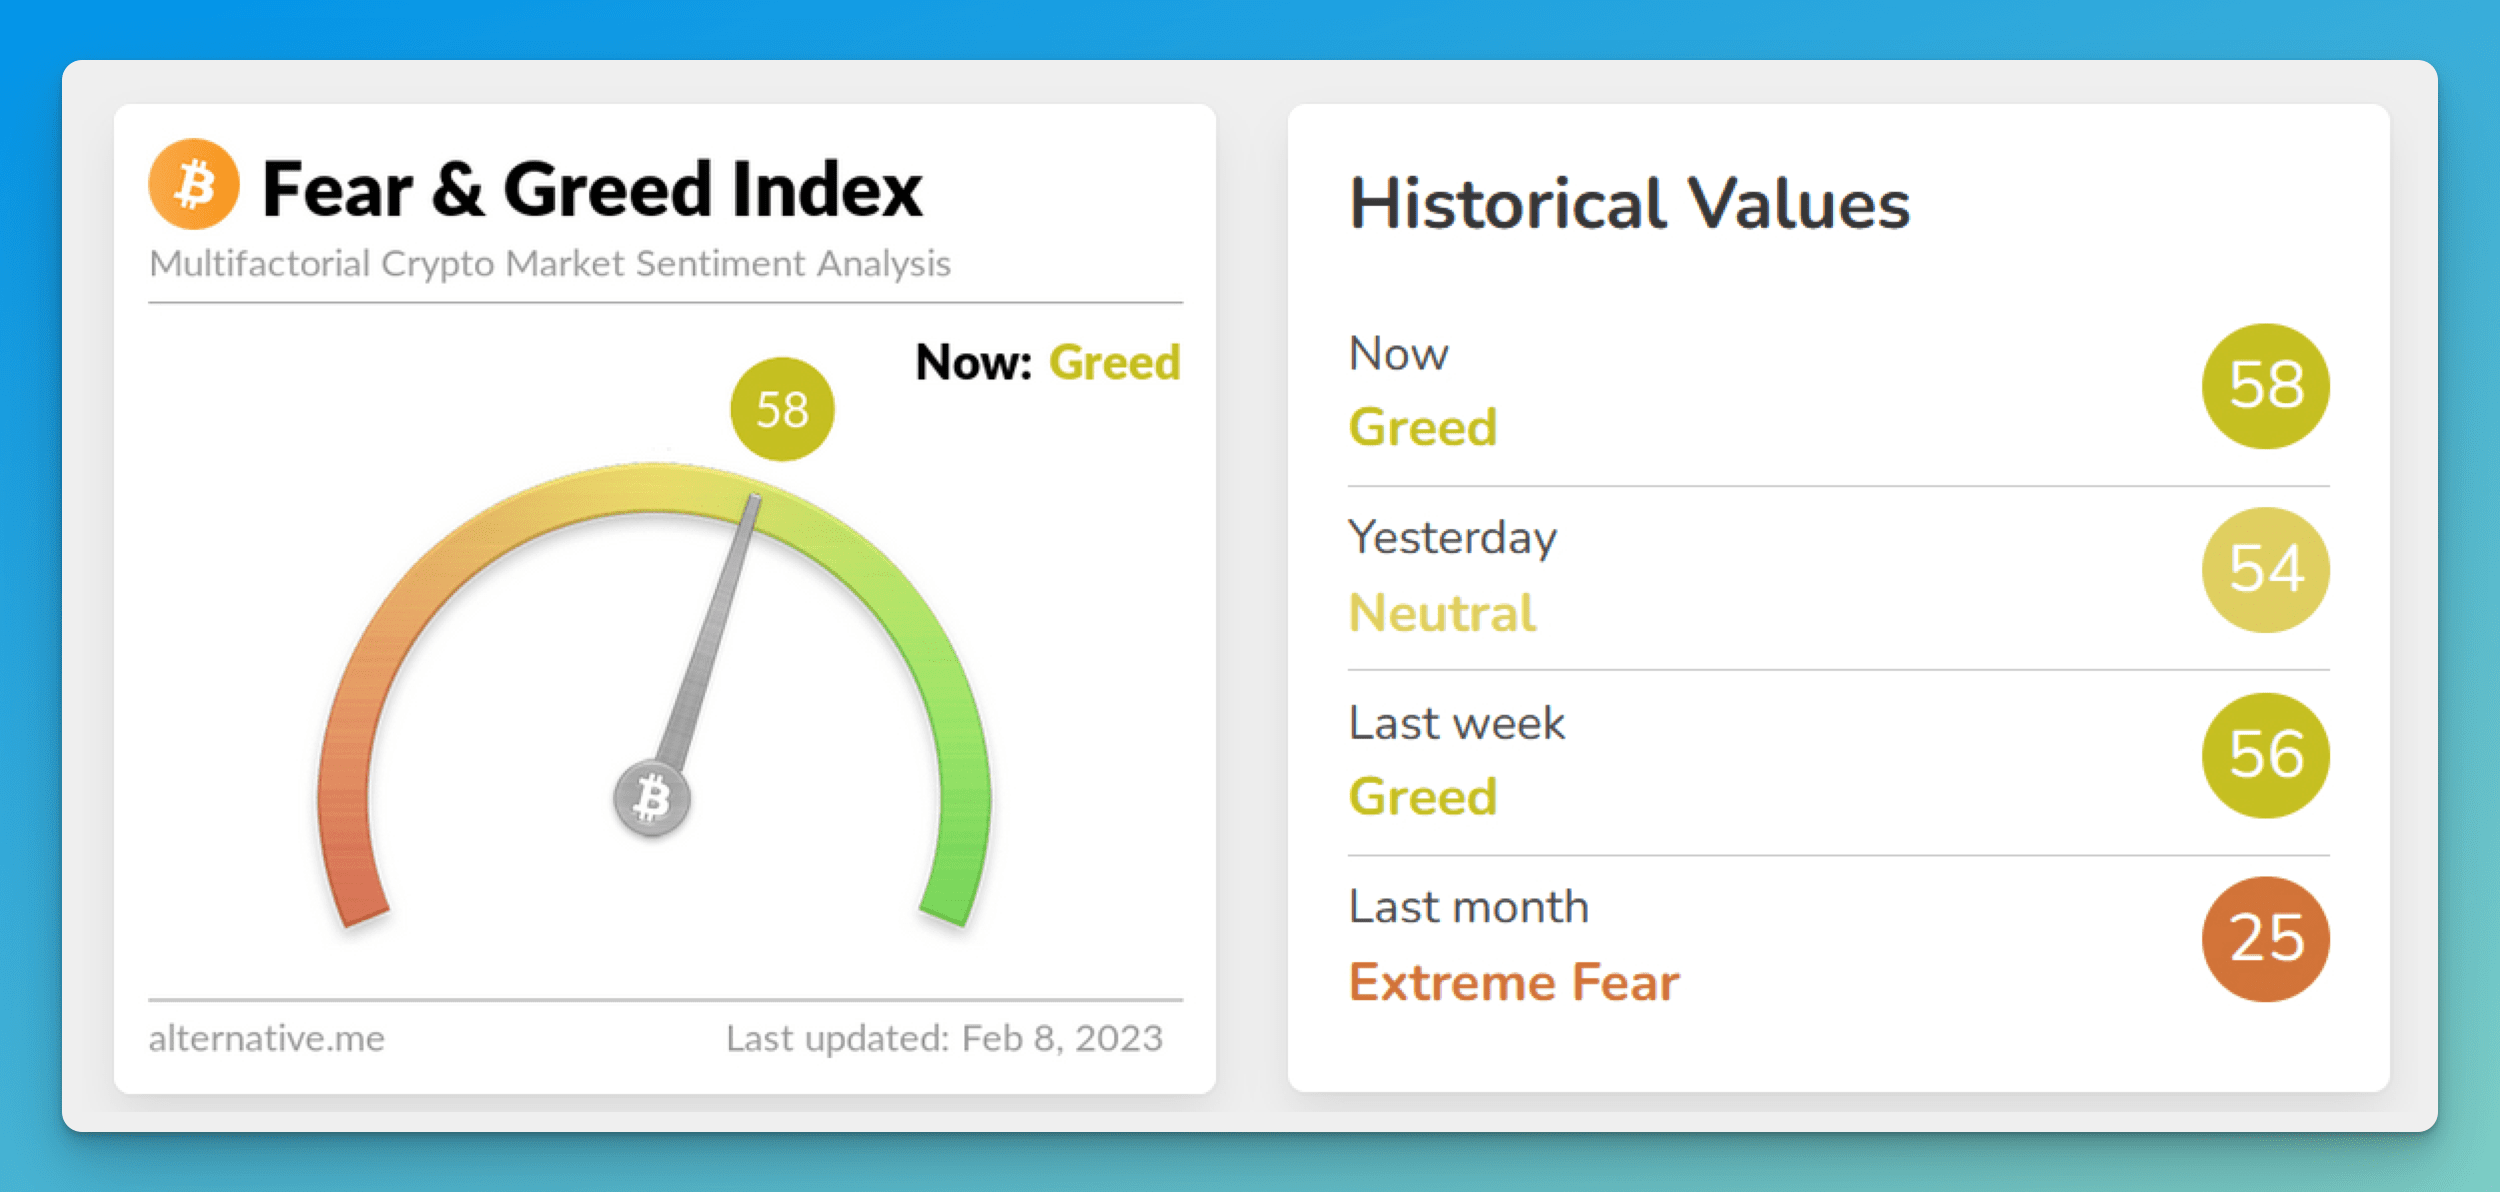 Pic. 2. The Alternative.me Crypto Fear and Greed Index.